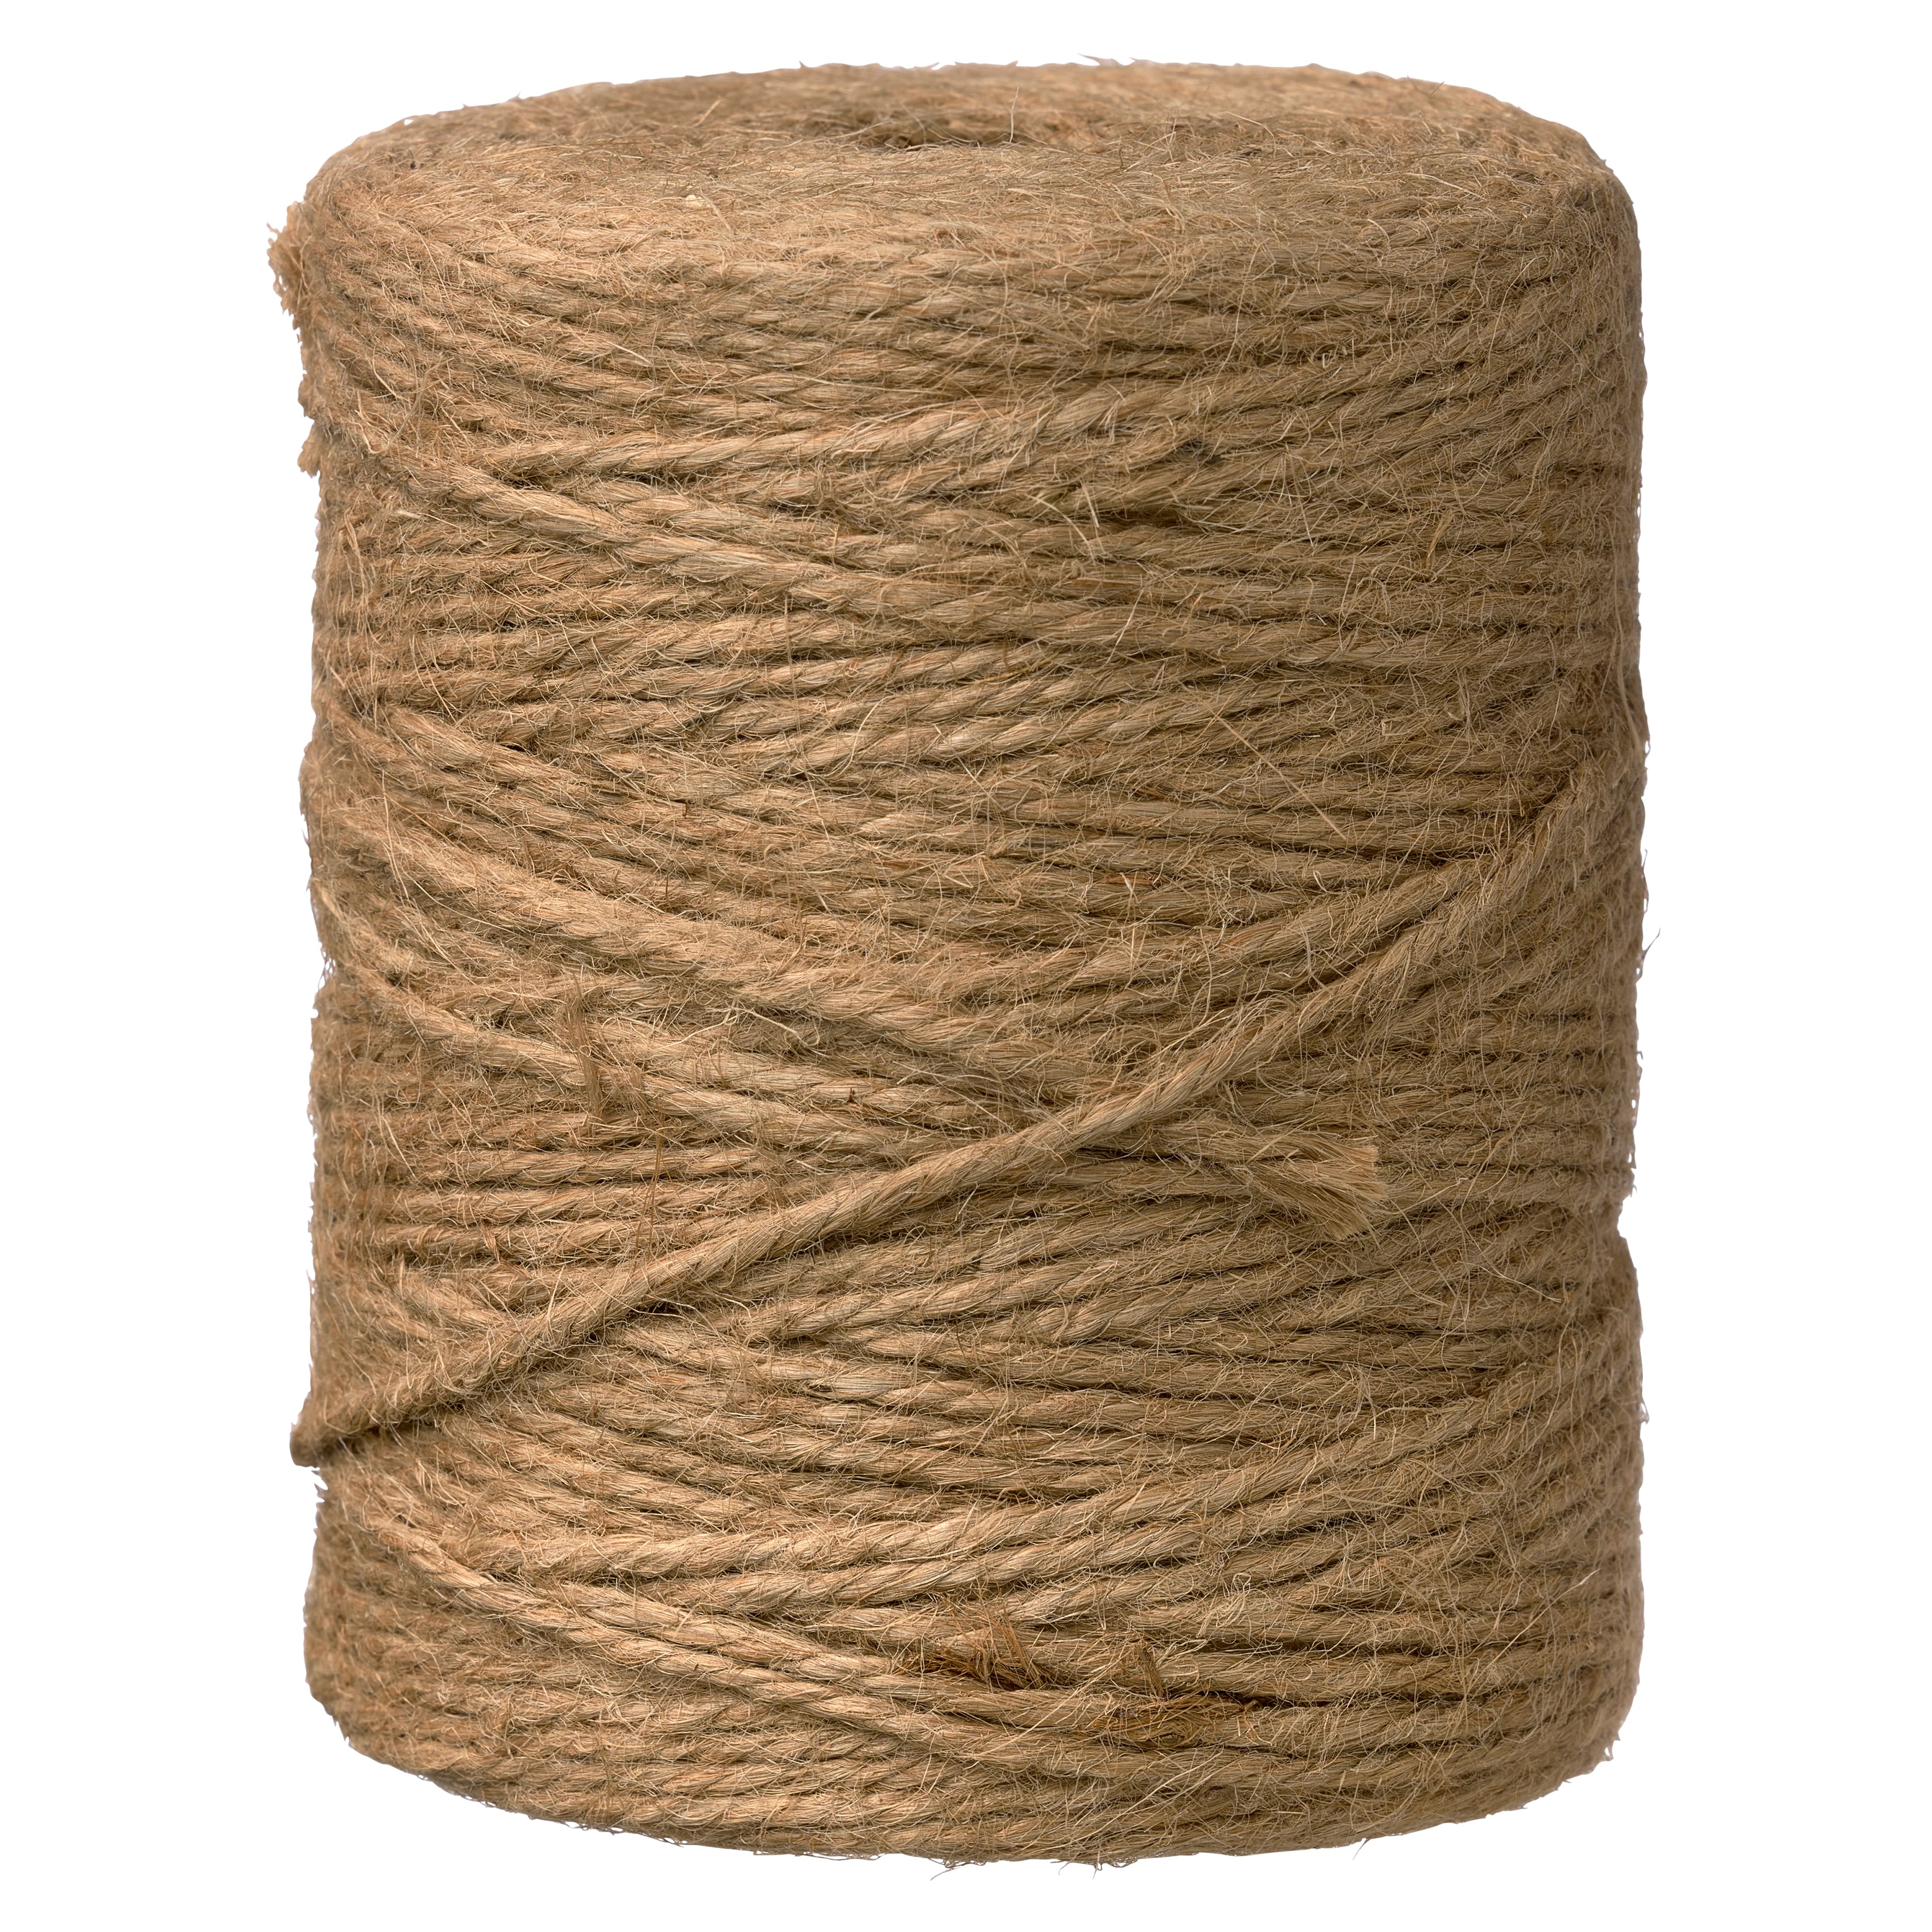 100 FT JUTE ROPE 6MM 1/4 Inch - Great for Macrame, Craft, Handmade